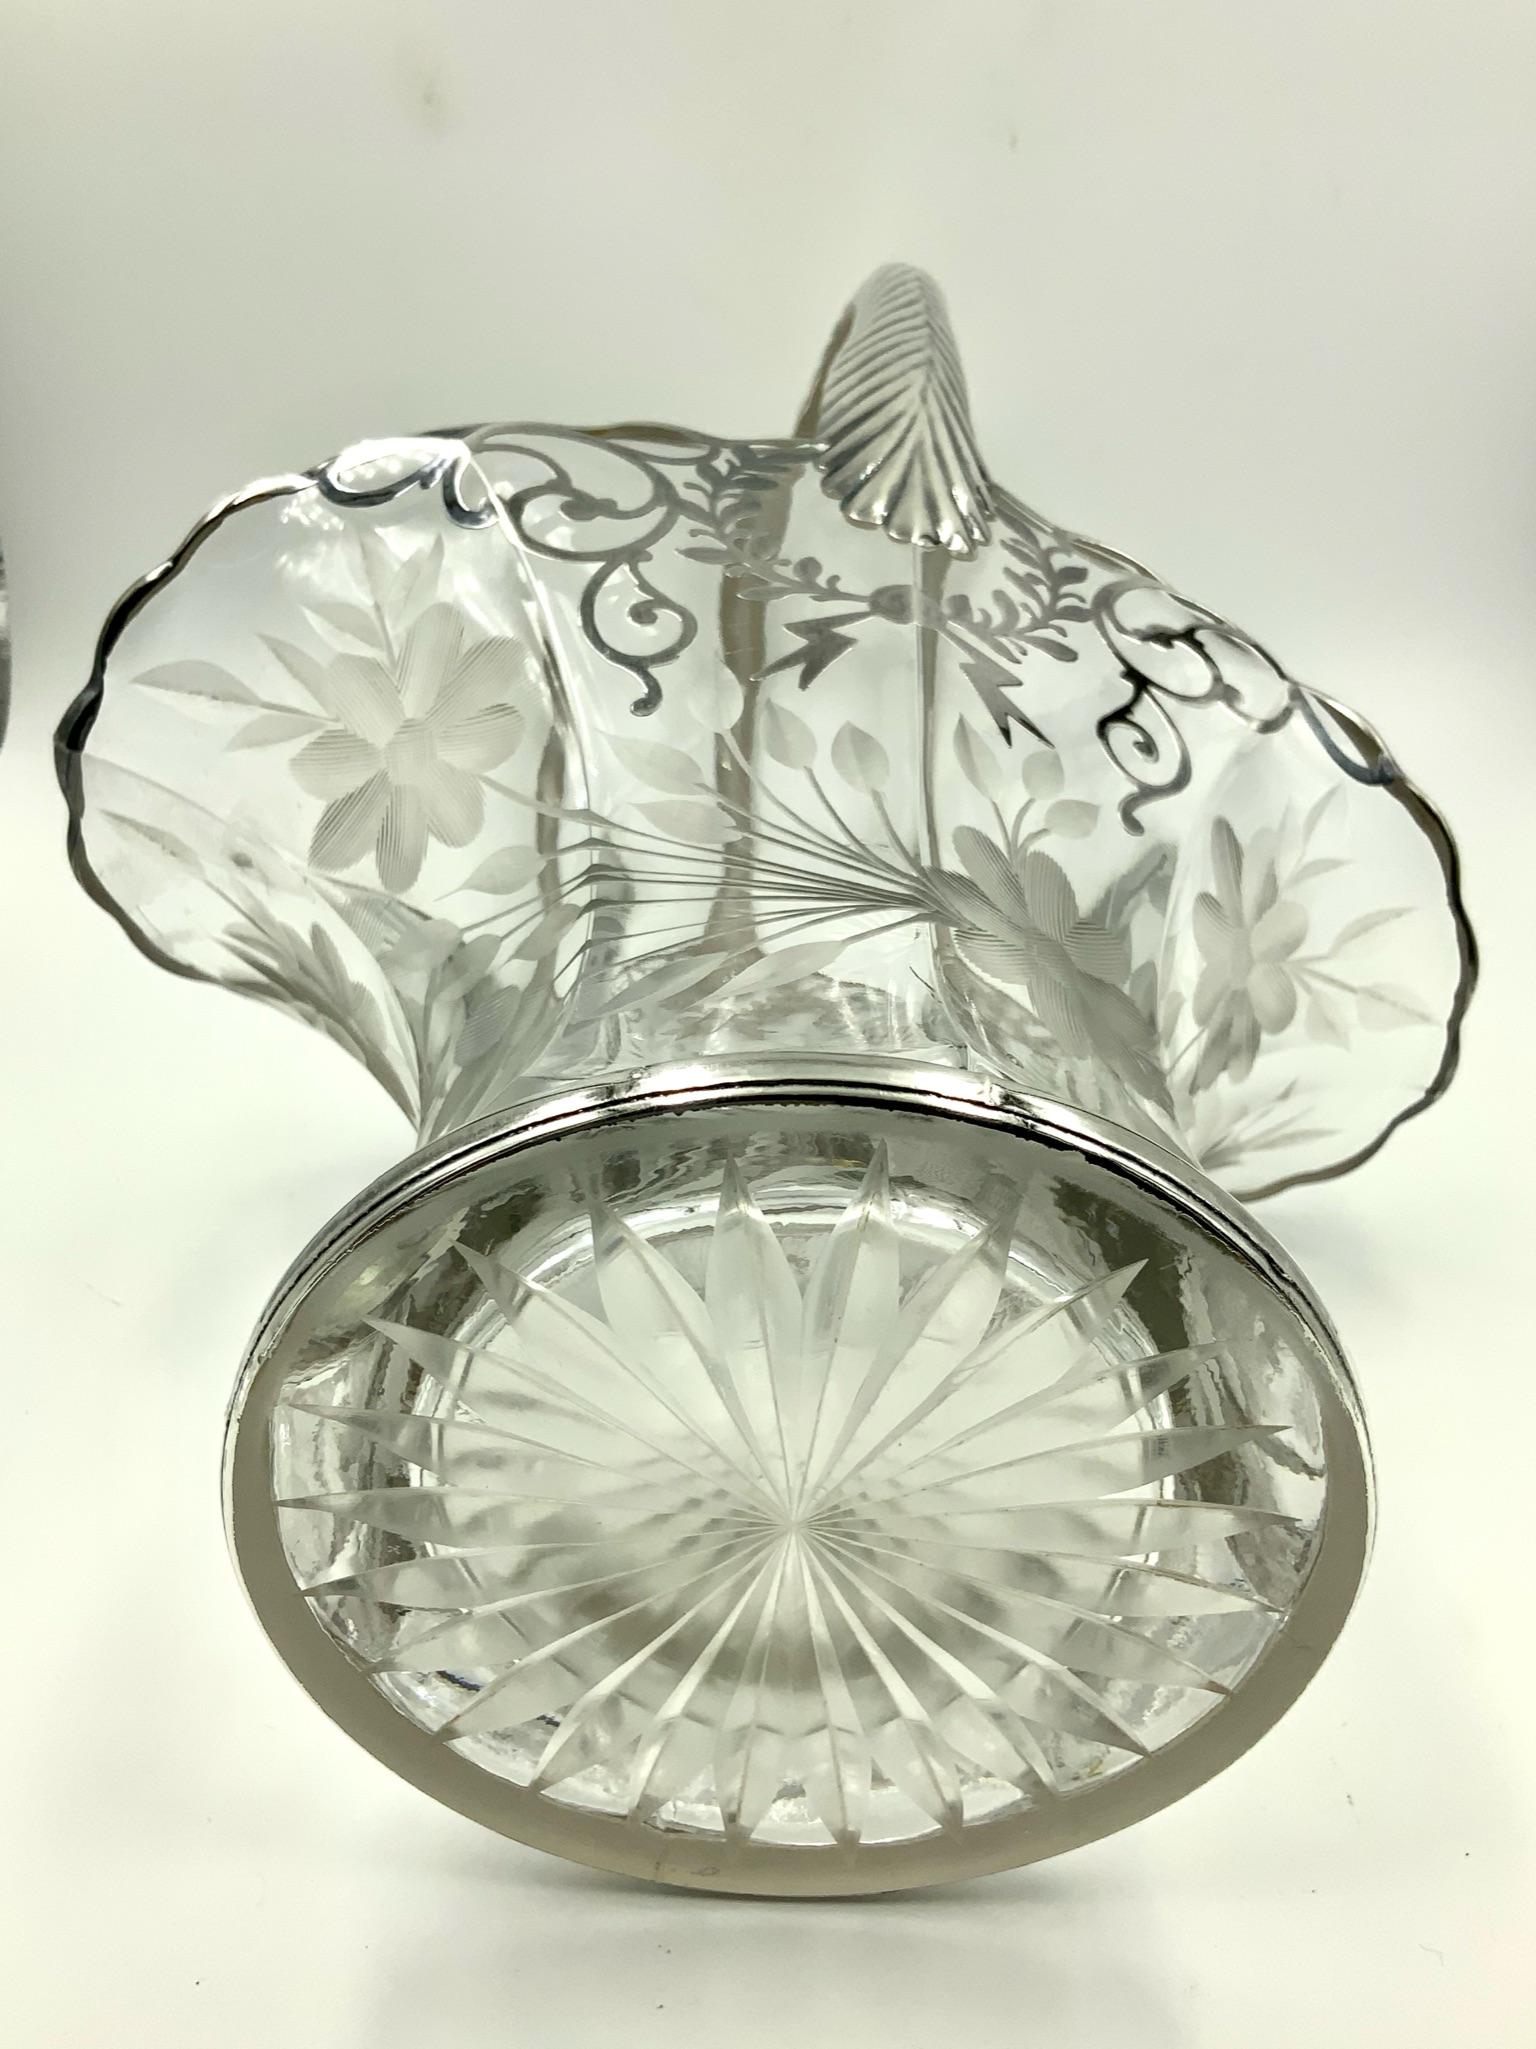 Incredible early 20th century floral wedding basket featuring an etched floral design on the bottom area and a garland scroll sterling silver overlay design on the top part. It is completed by a highly stylized sterling overlay handle. A truly